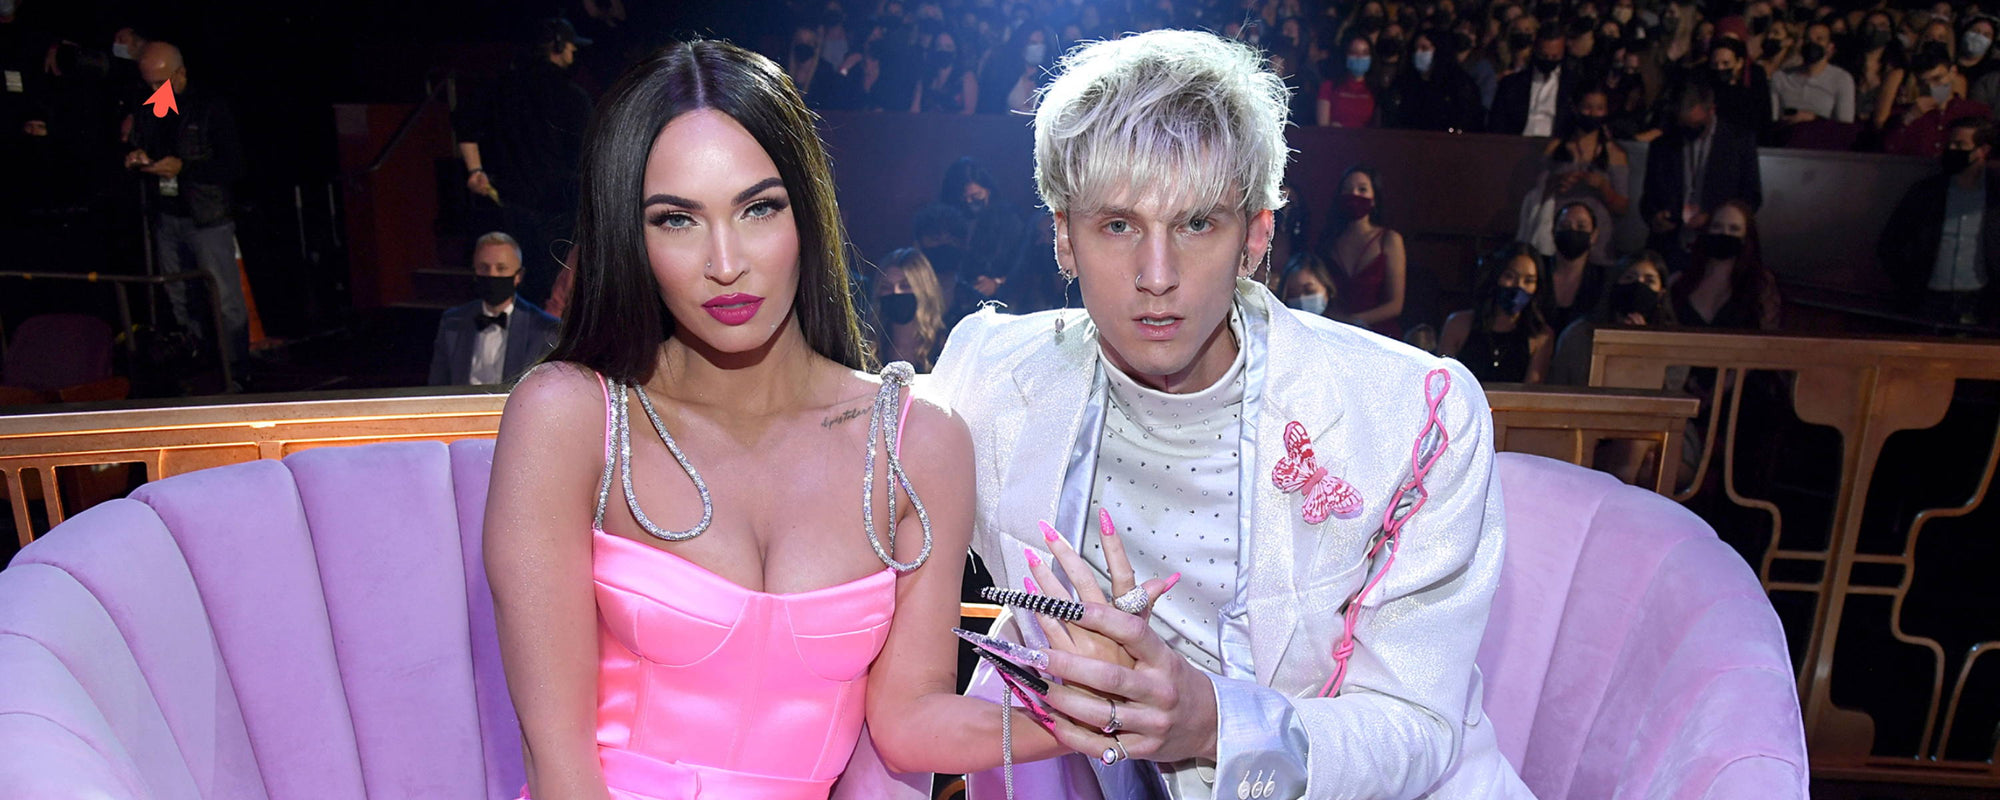 Machine Gun Kelly Proposes to Megan Fox With a Custom Designed Engagement Ring